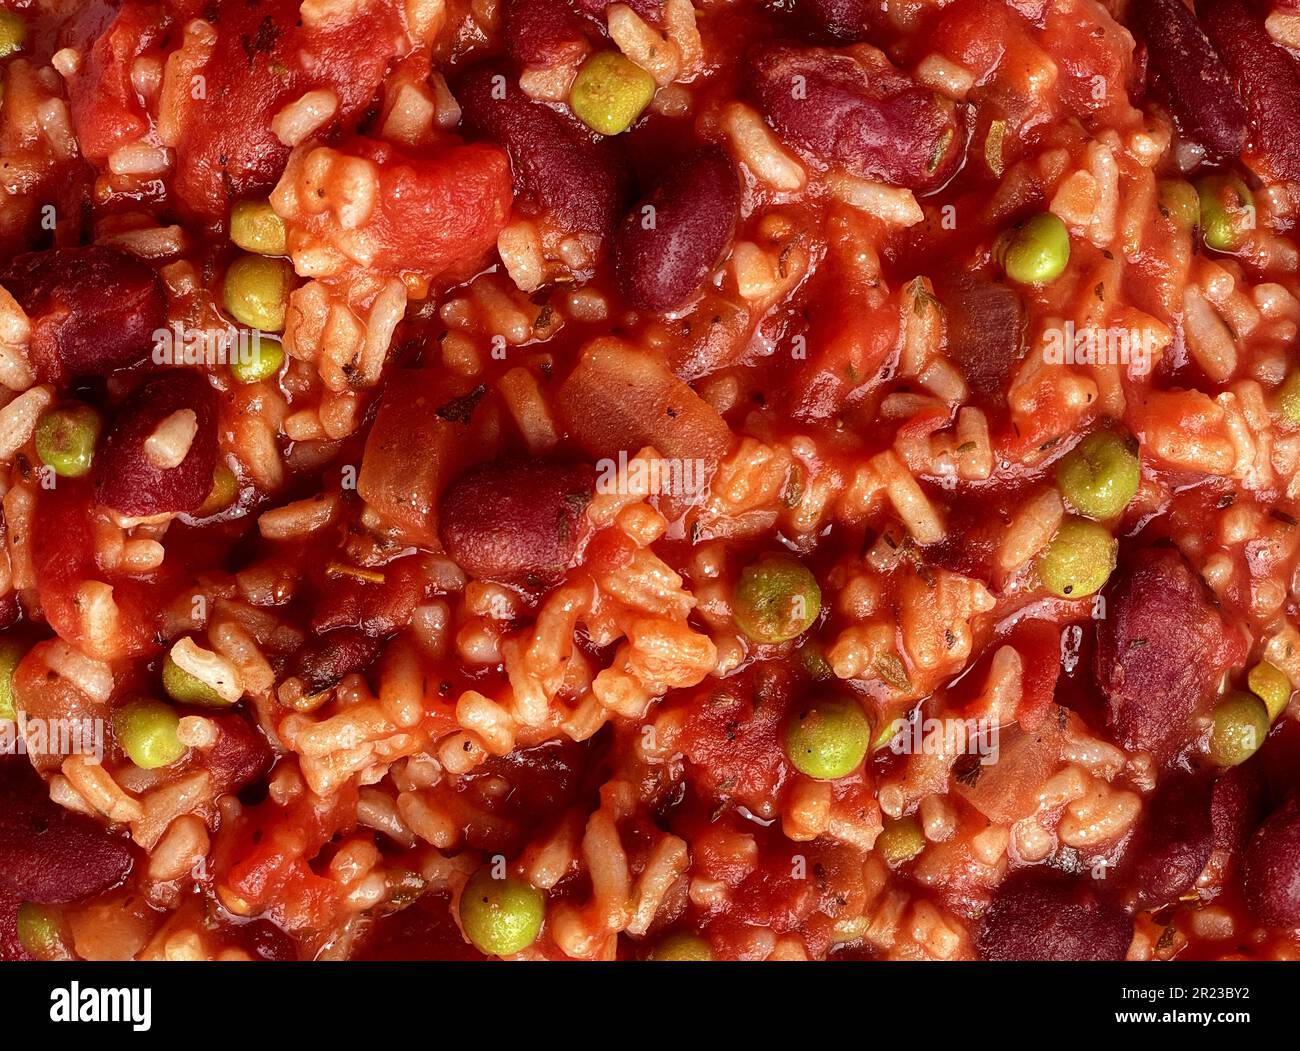 Vegan chili or vegetarian tomato bean risotto as a plant based rustic meal with rice tomatoes and kidney beans as an organic cuisine. Stock Photo